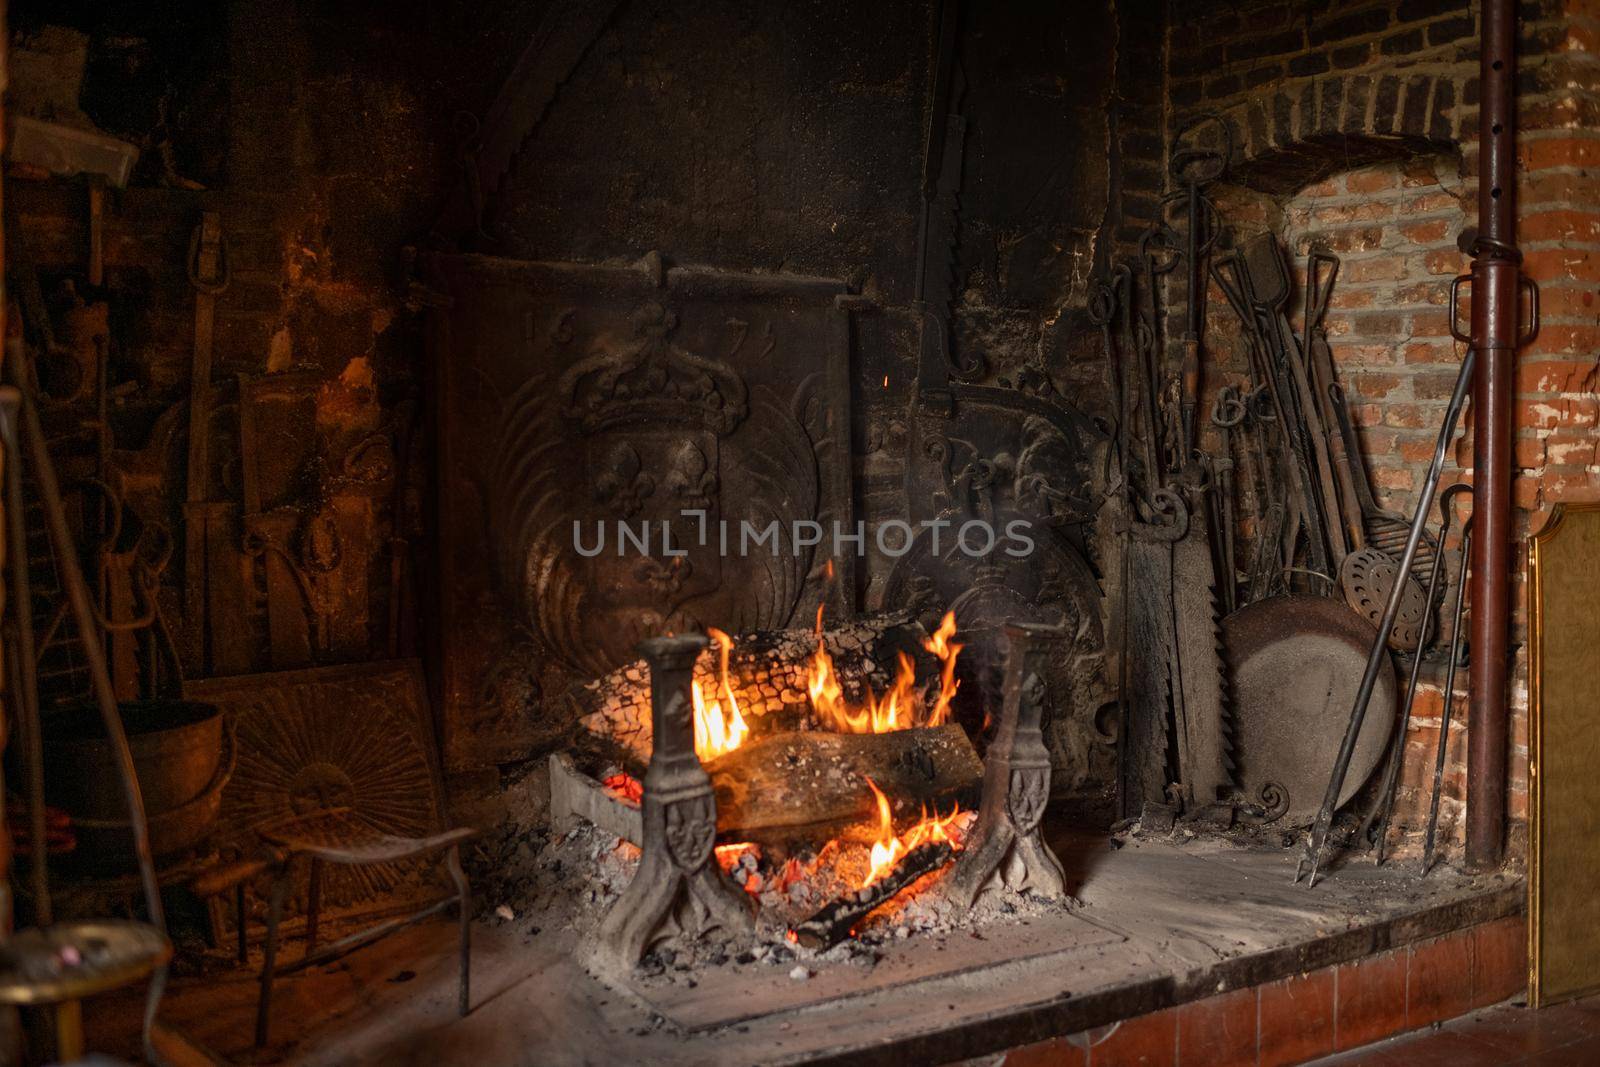 Fireplace and bonfire with firewood in an old French house